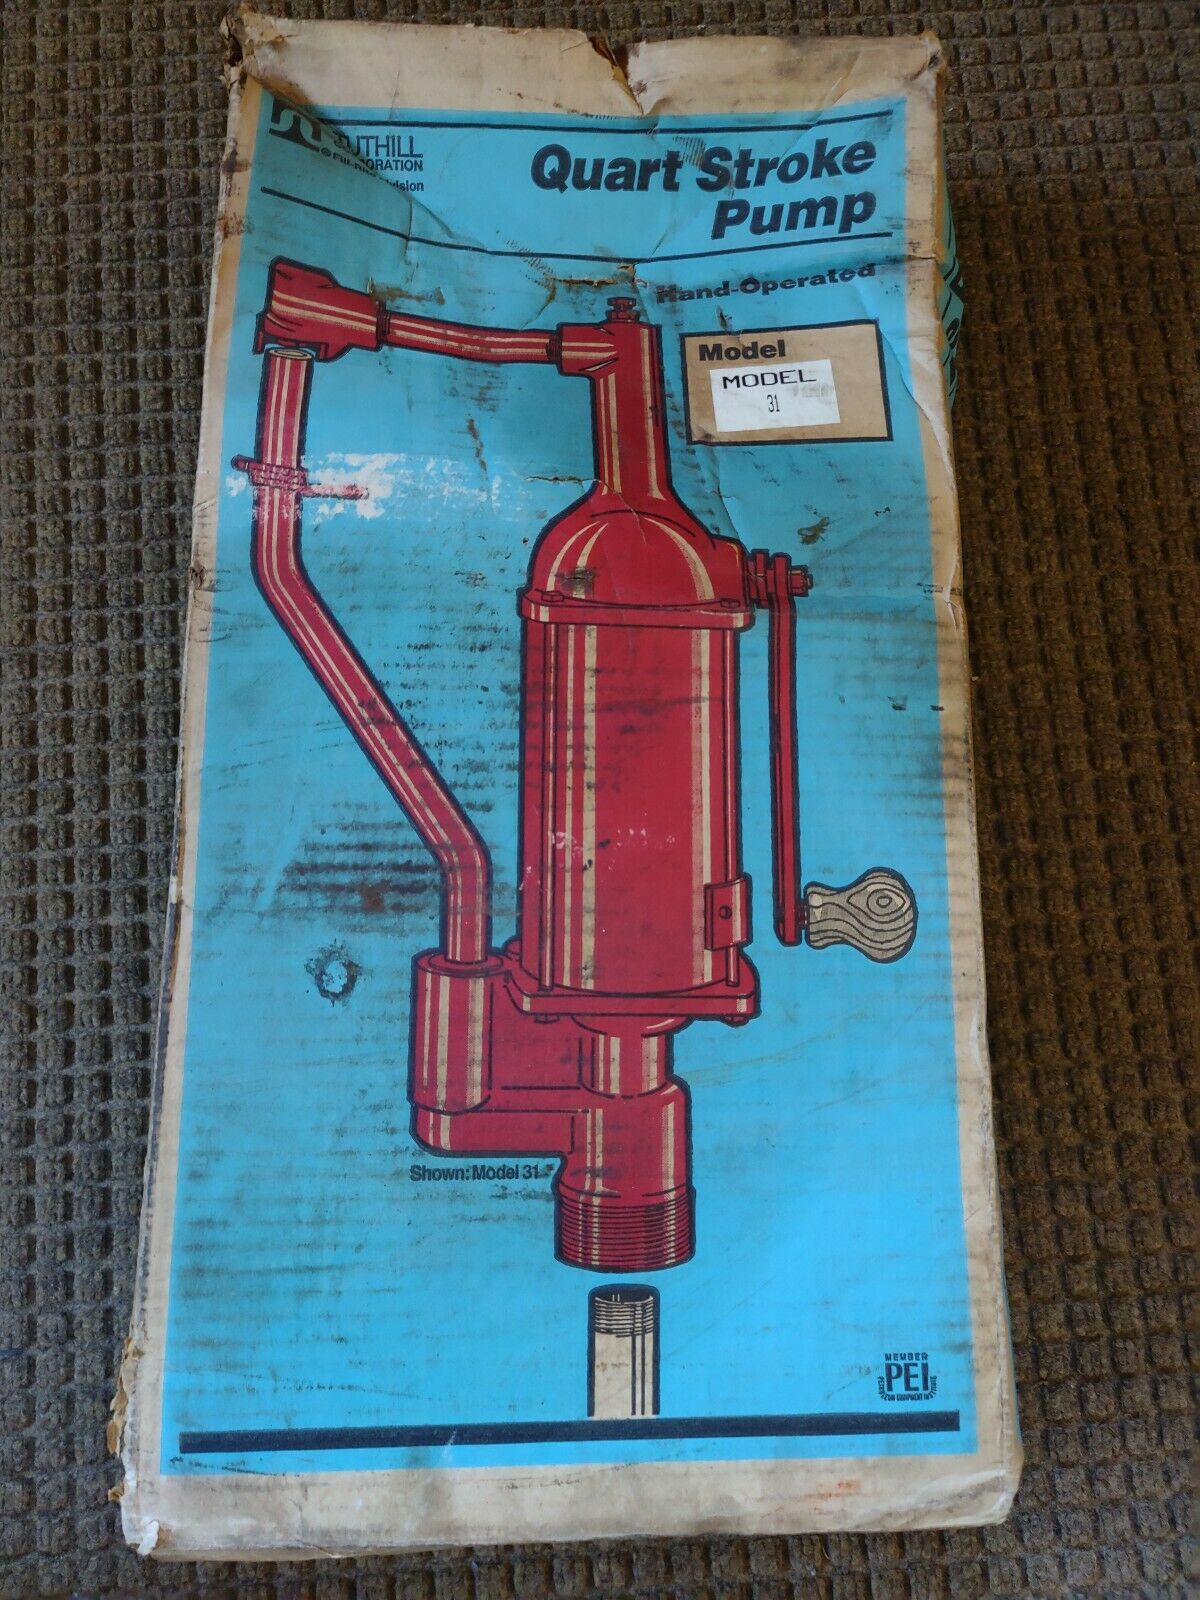 New Tuthill Corporation Hand Operated Manual Quart Stroke Pump Model 31